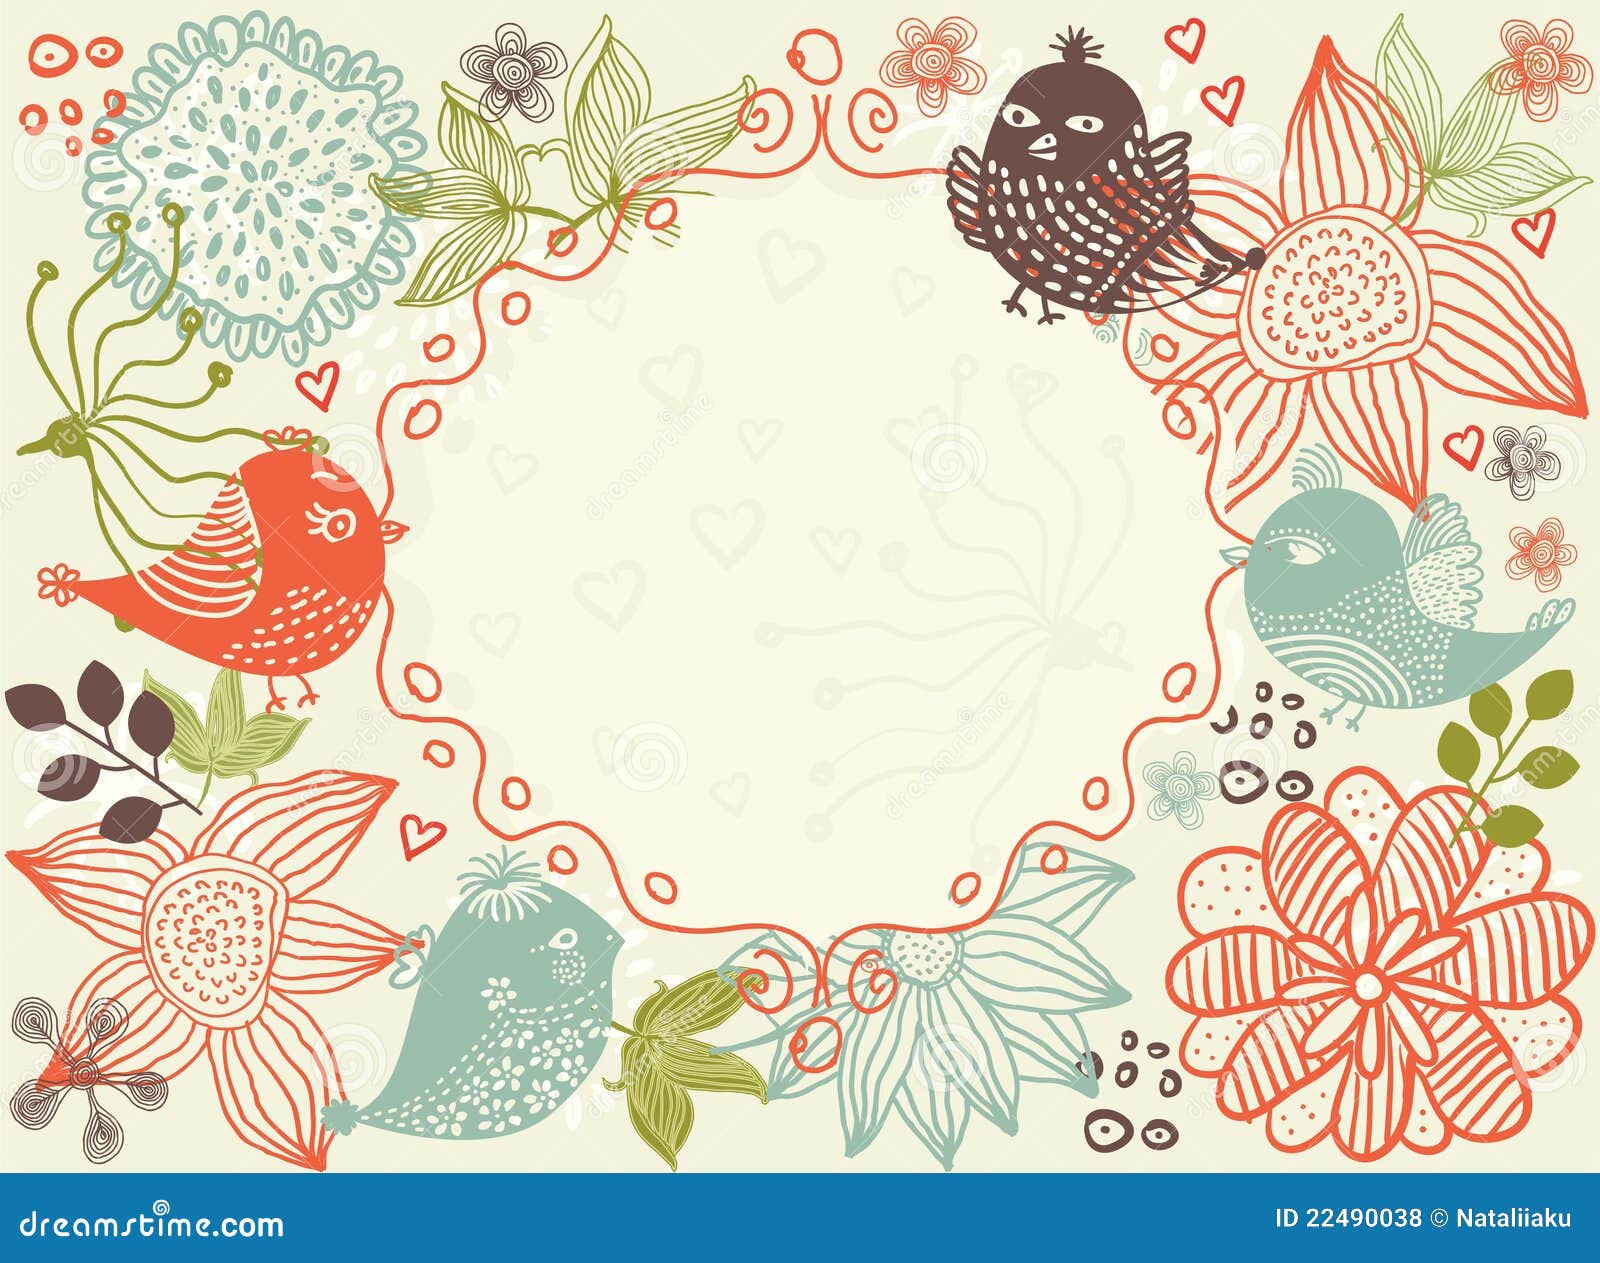 Floral background with frame in vector. Pattern floral with birds a banner